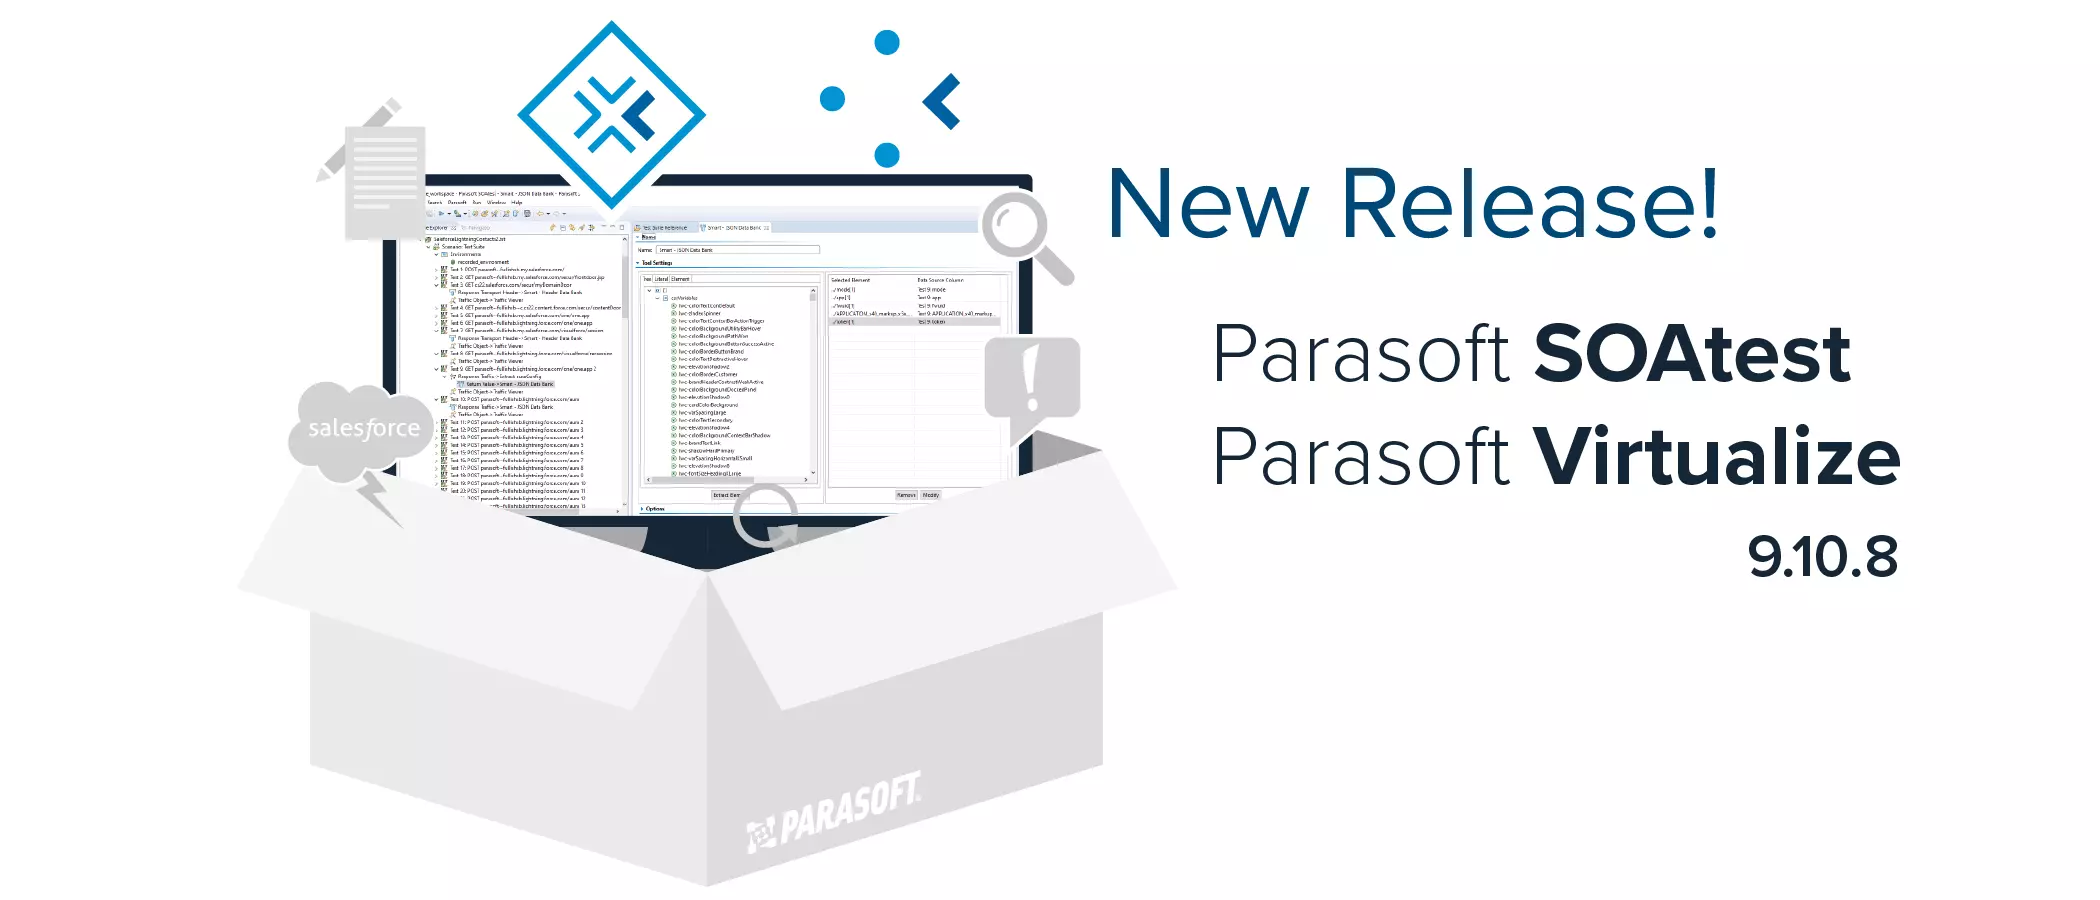 New 9.10.8 releases of Parasoft SOAtest and Parasoft Virtualize!